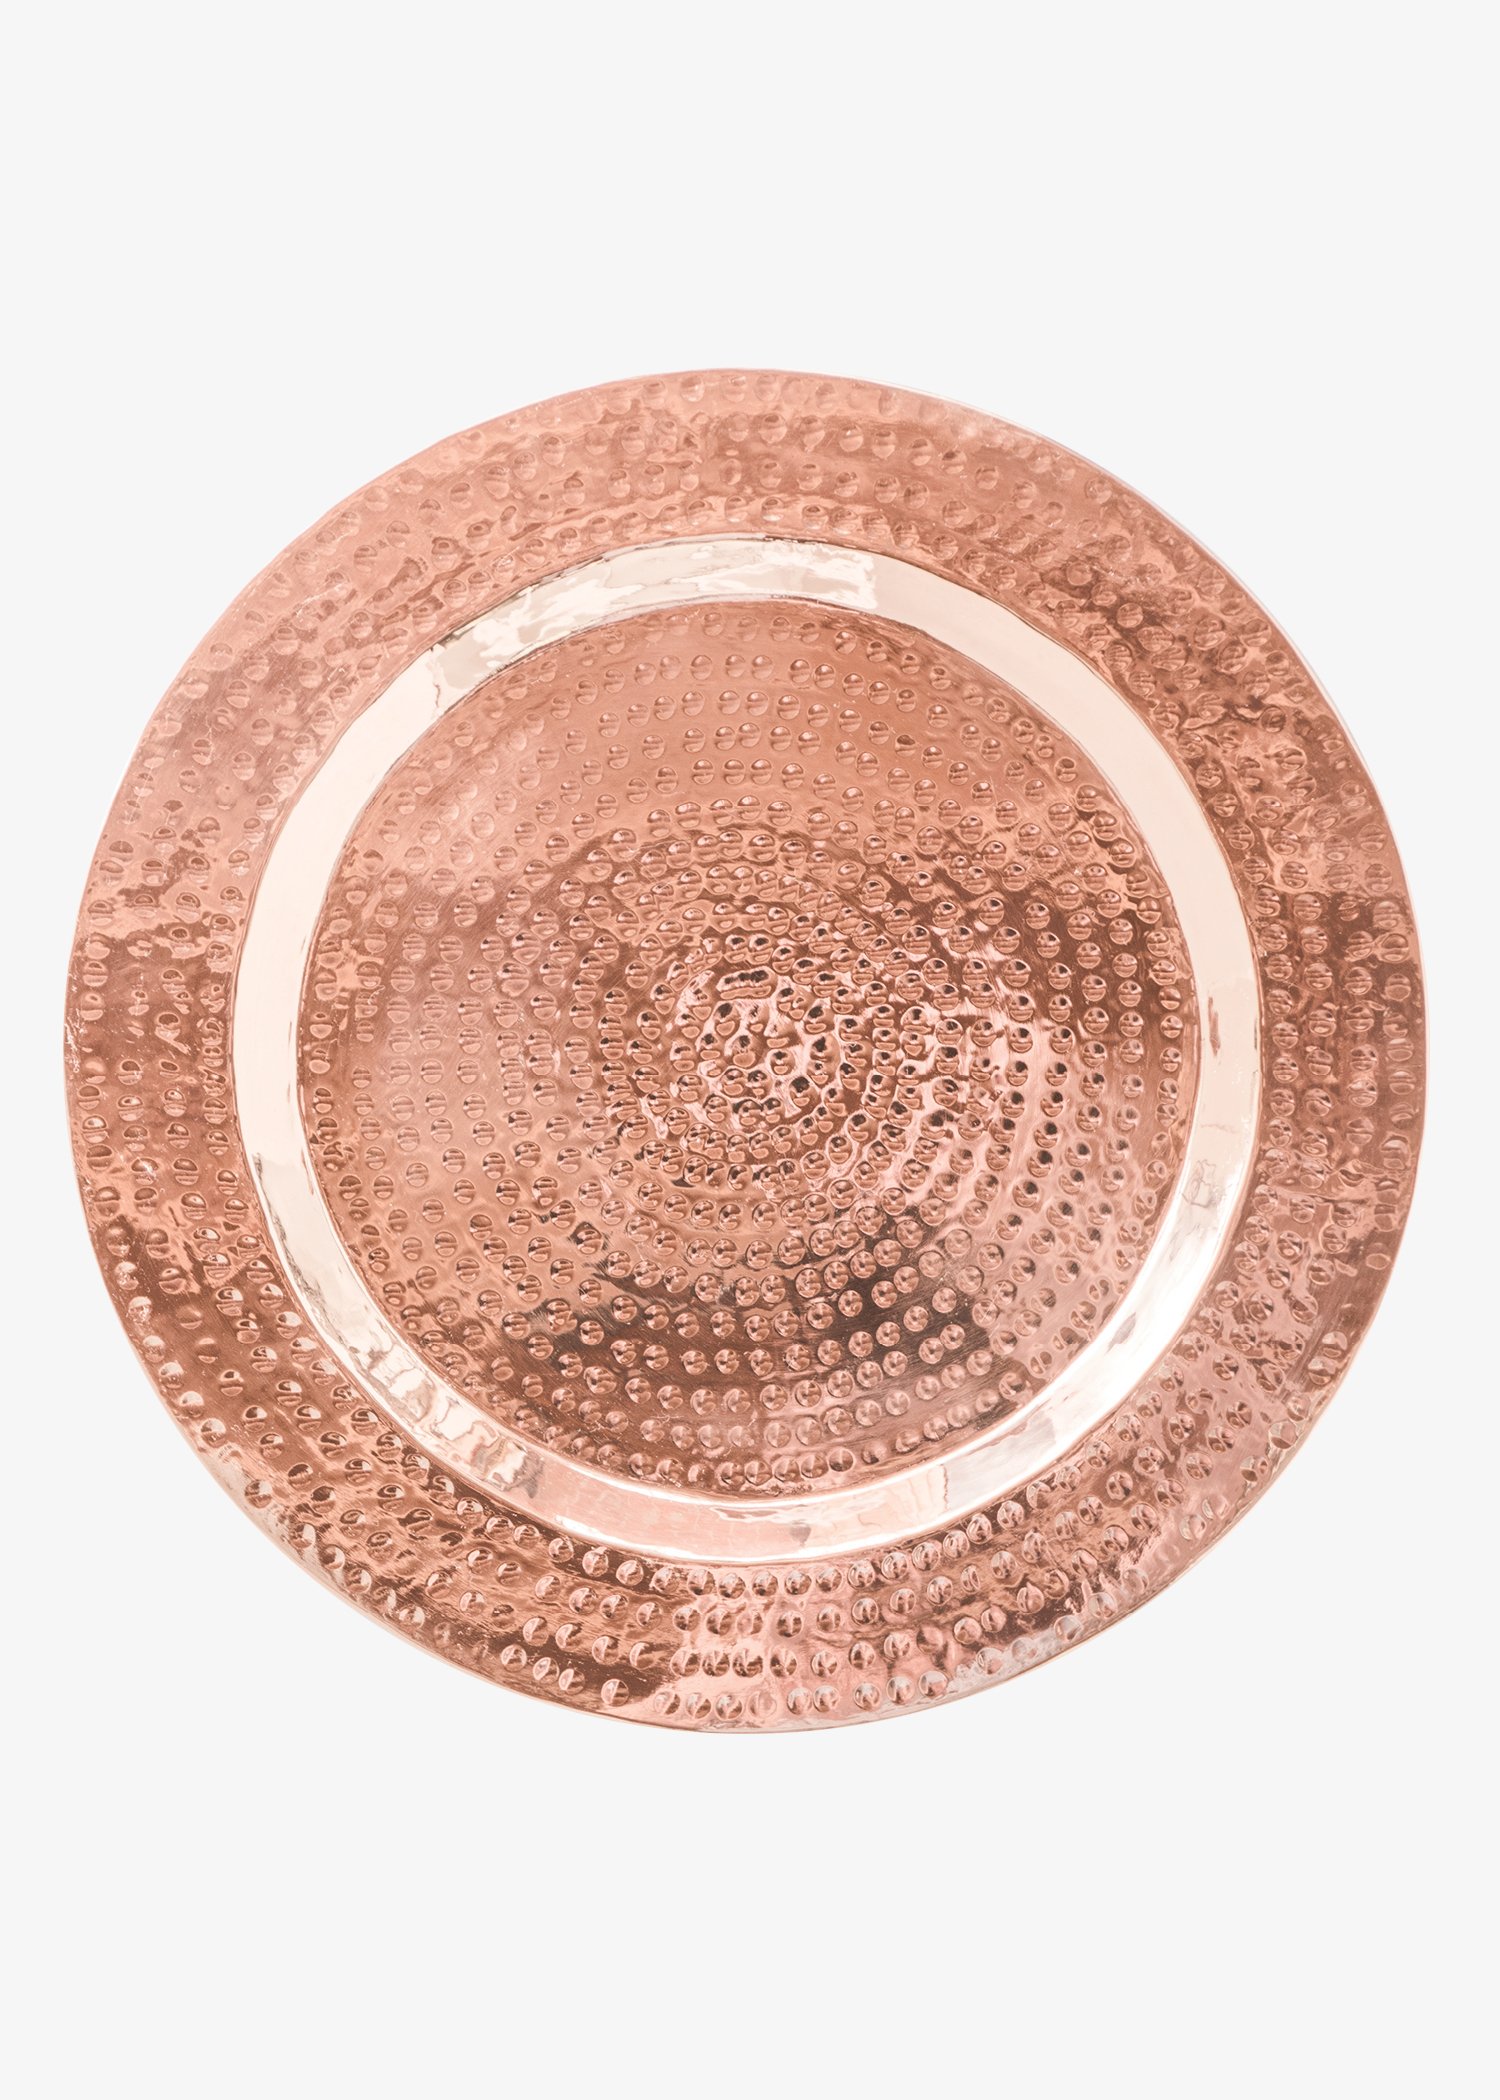 Copper Hammered Charger Plate Rental - A to Z Event Rentals, LLC.